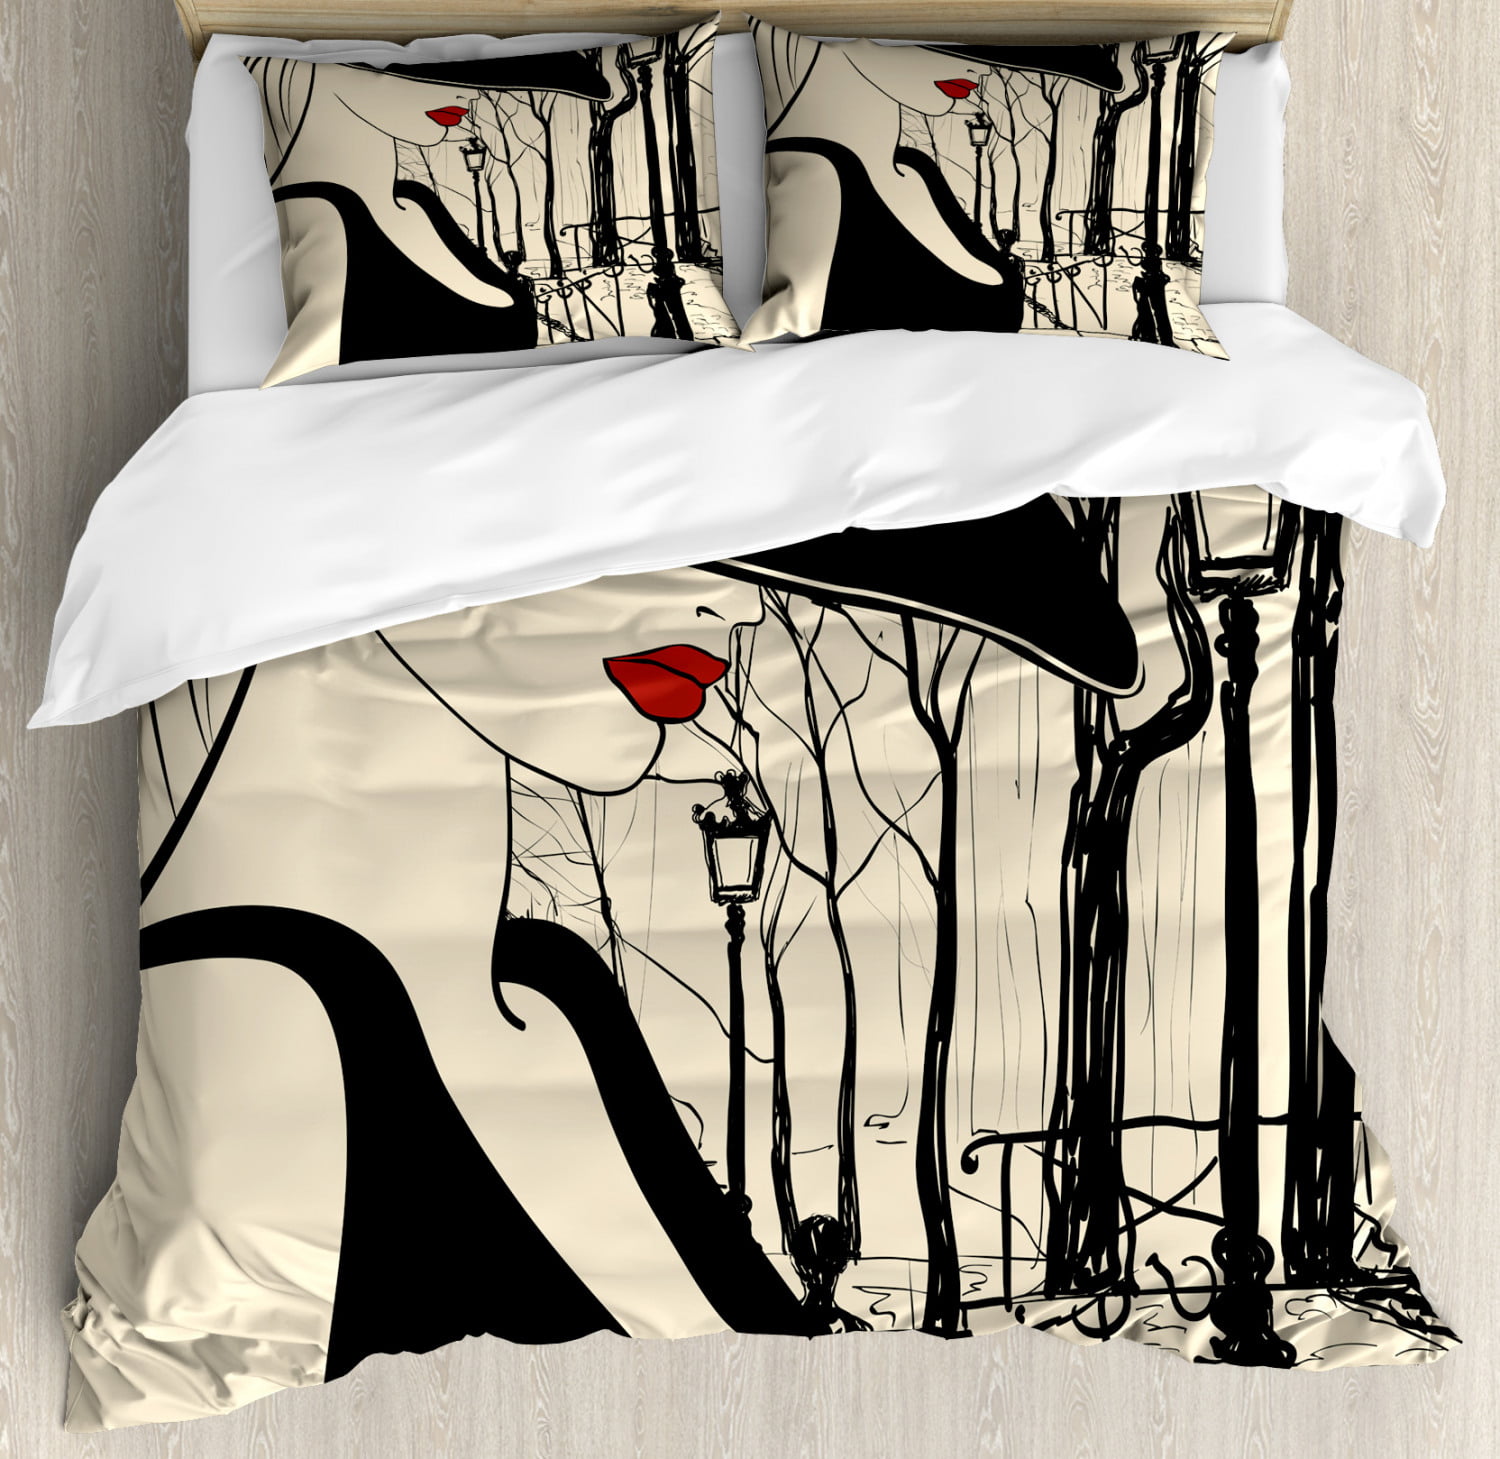 Black And Beige King Size Duvet Cover Set Young European Woman